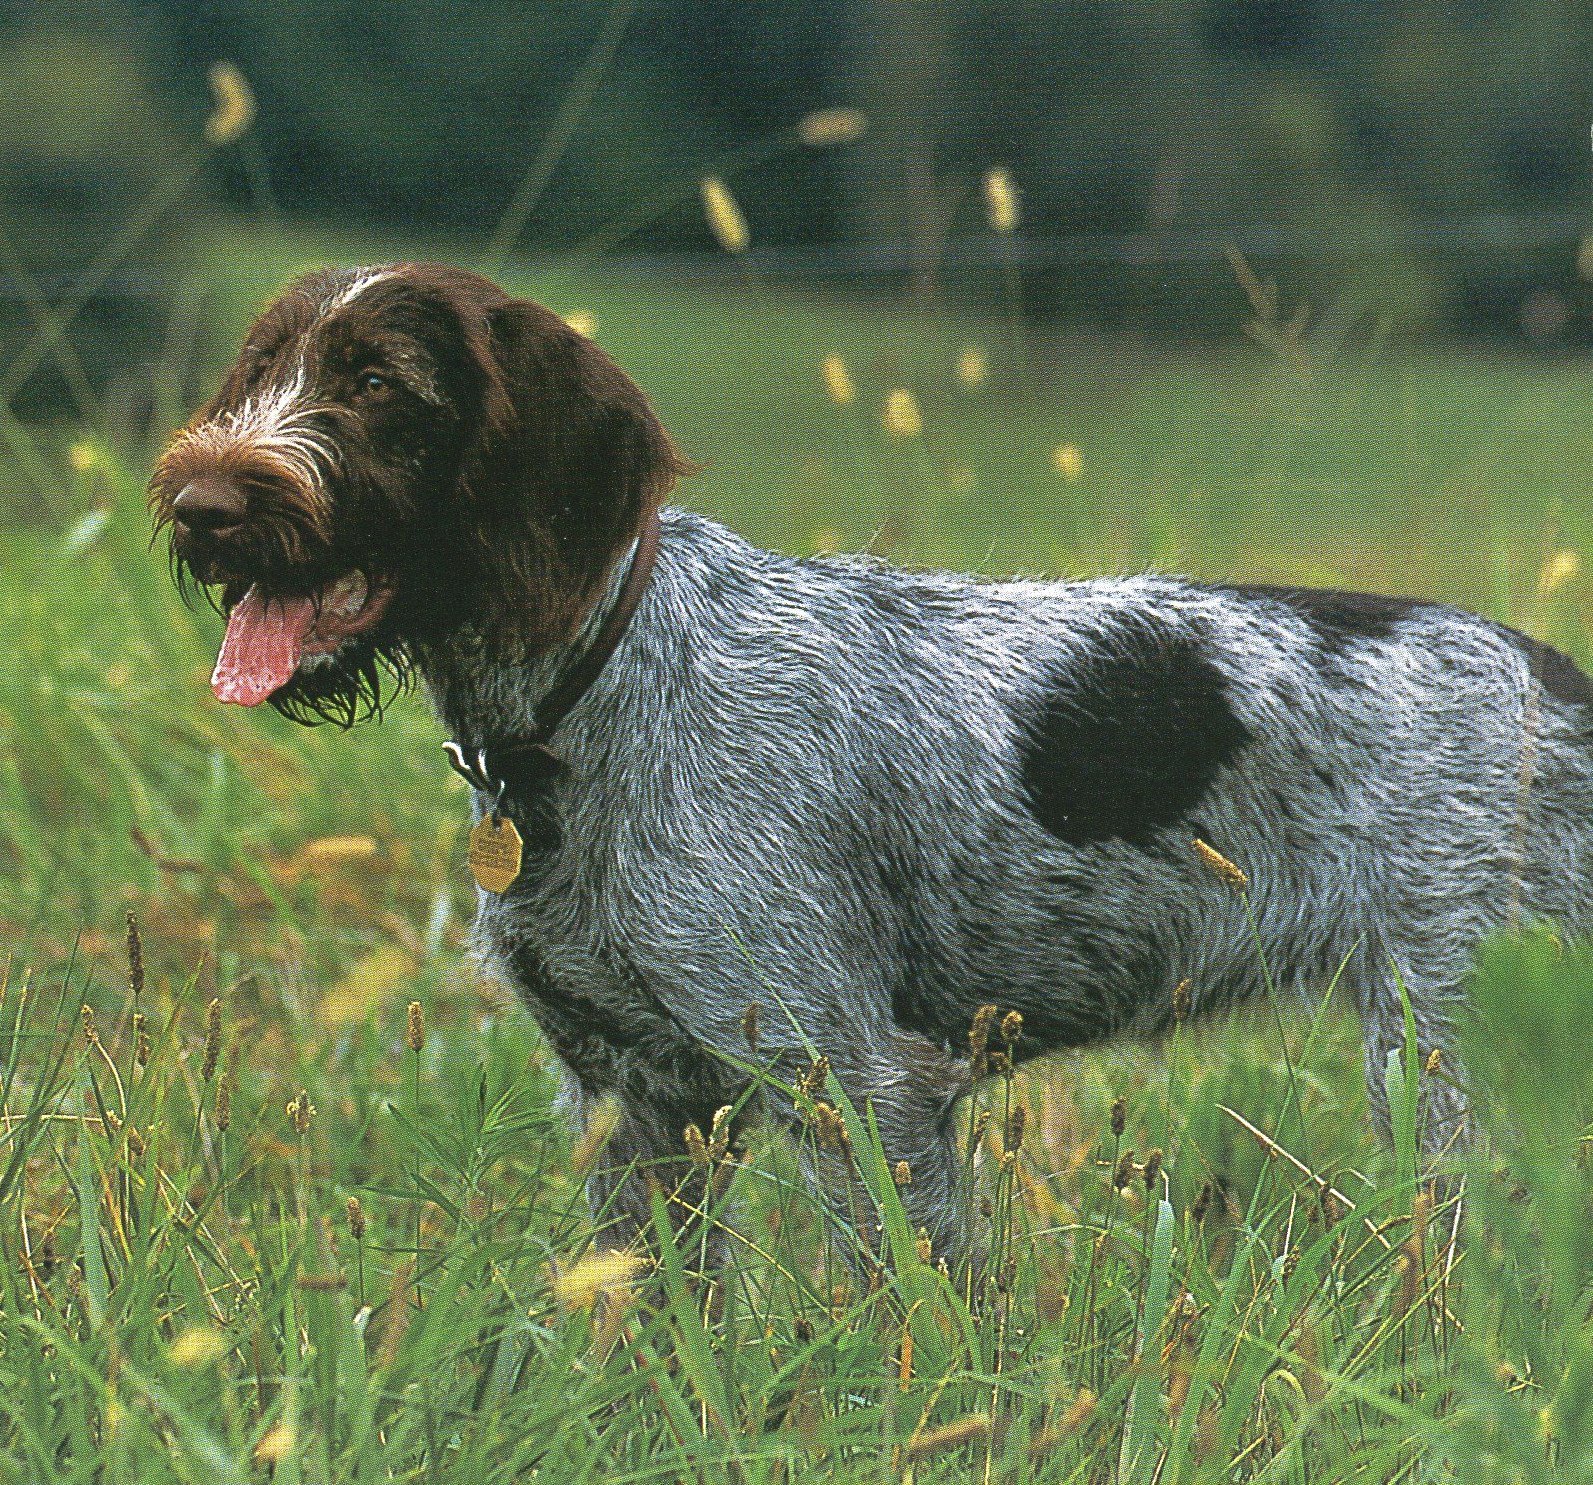 German Wirehaired Pointer Dog In The Field Photo And Wallpaper